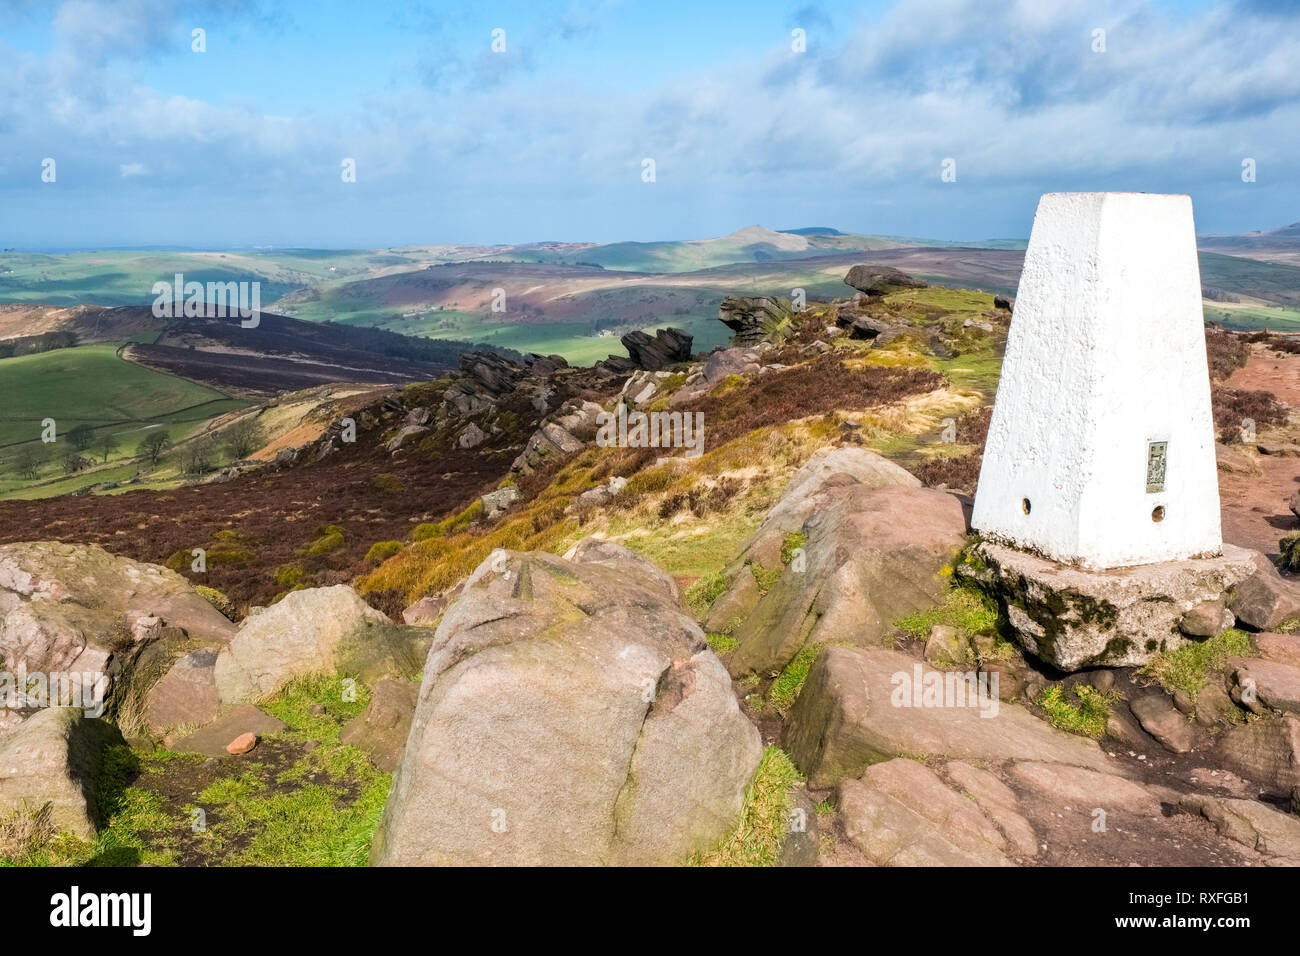 Trig point on the Roaches ridge in the Peak District National Park, UK Stock Photo